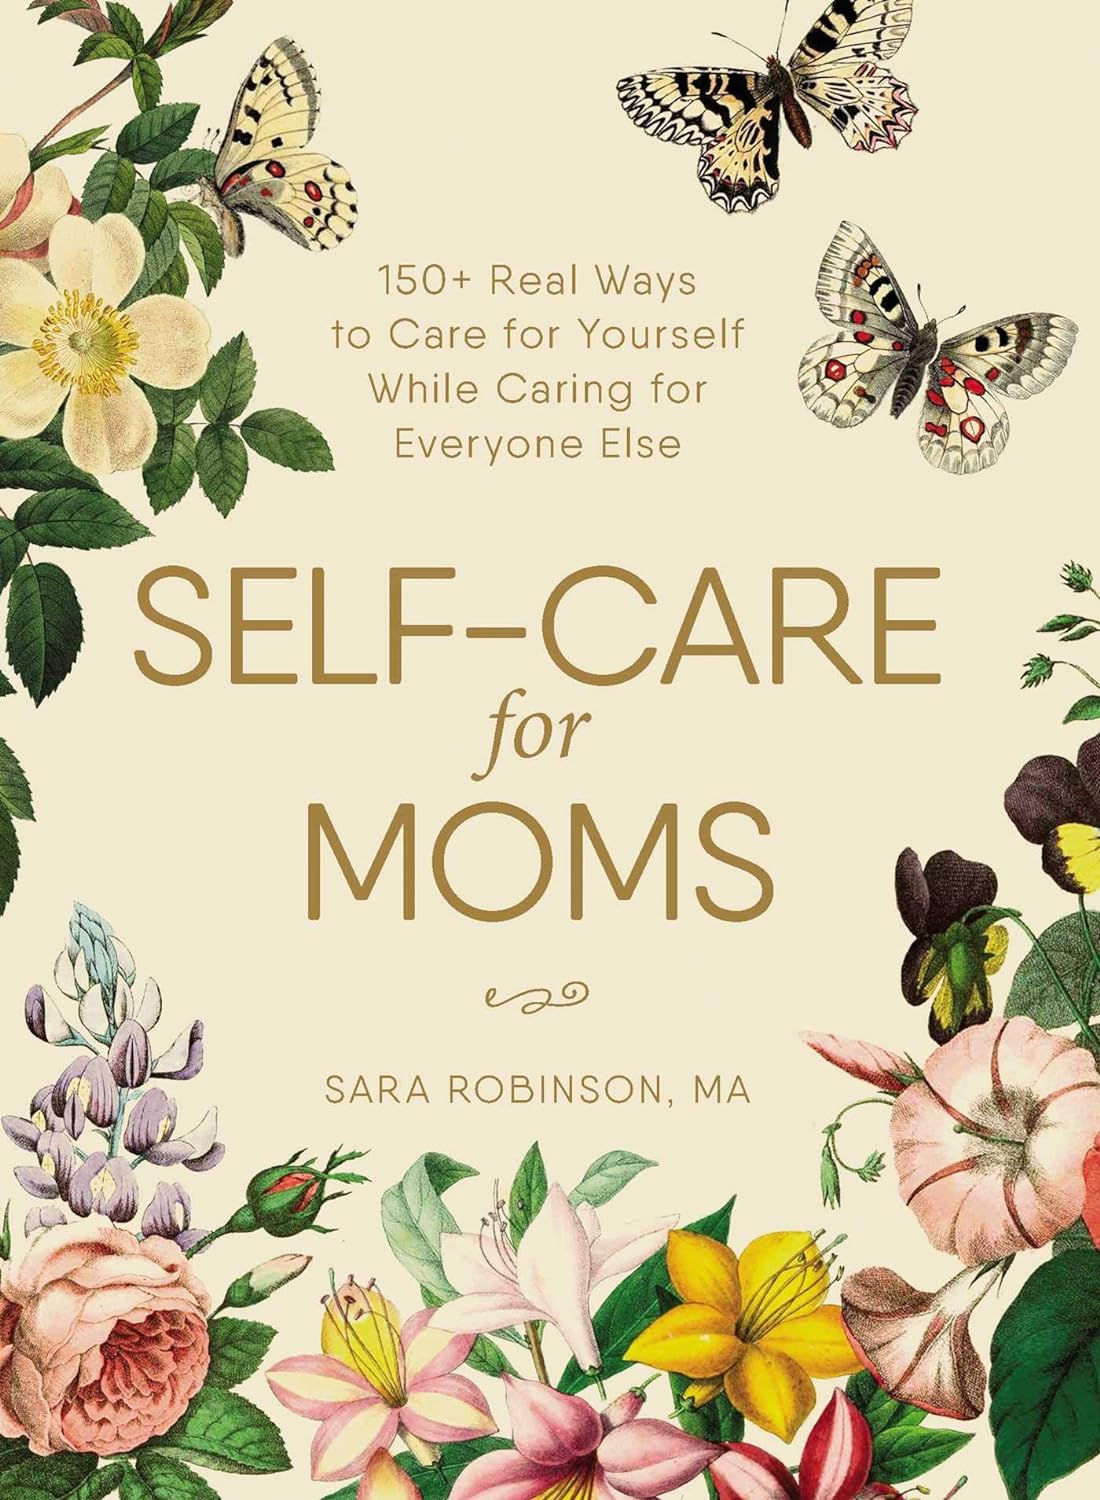 Self-Care for Moms Book - Home Works